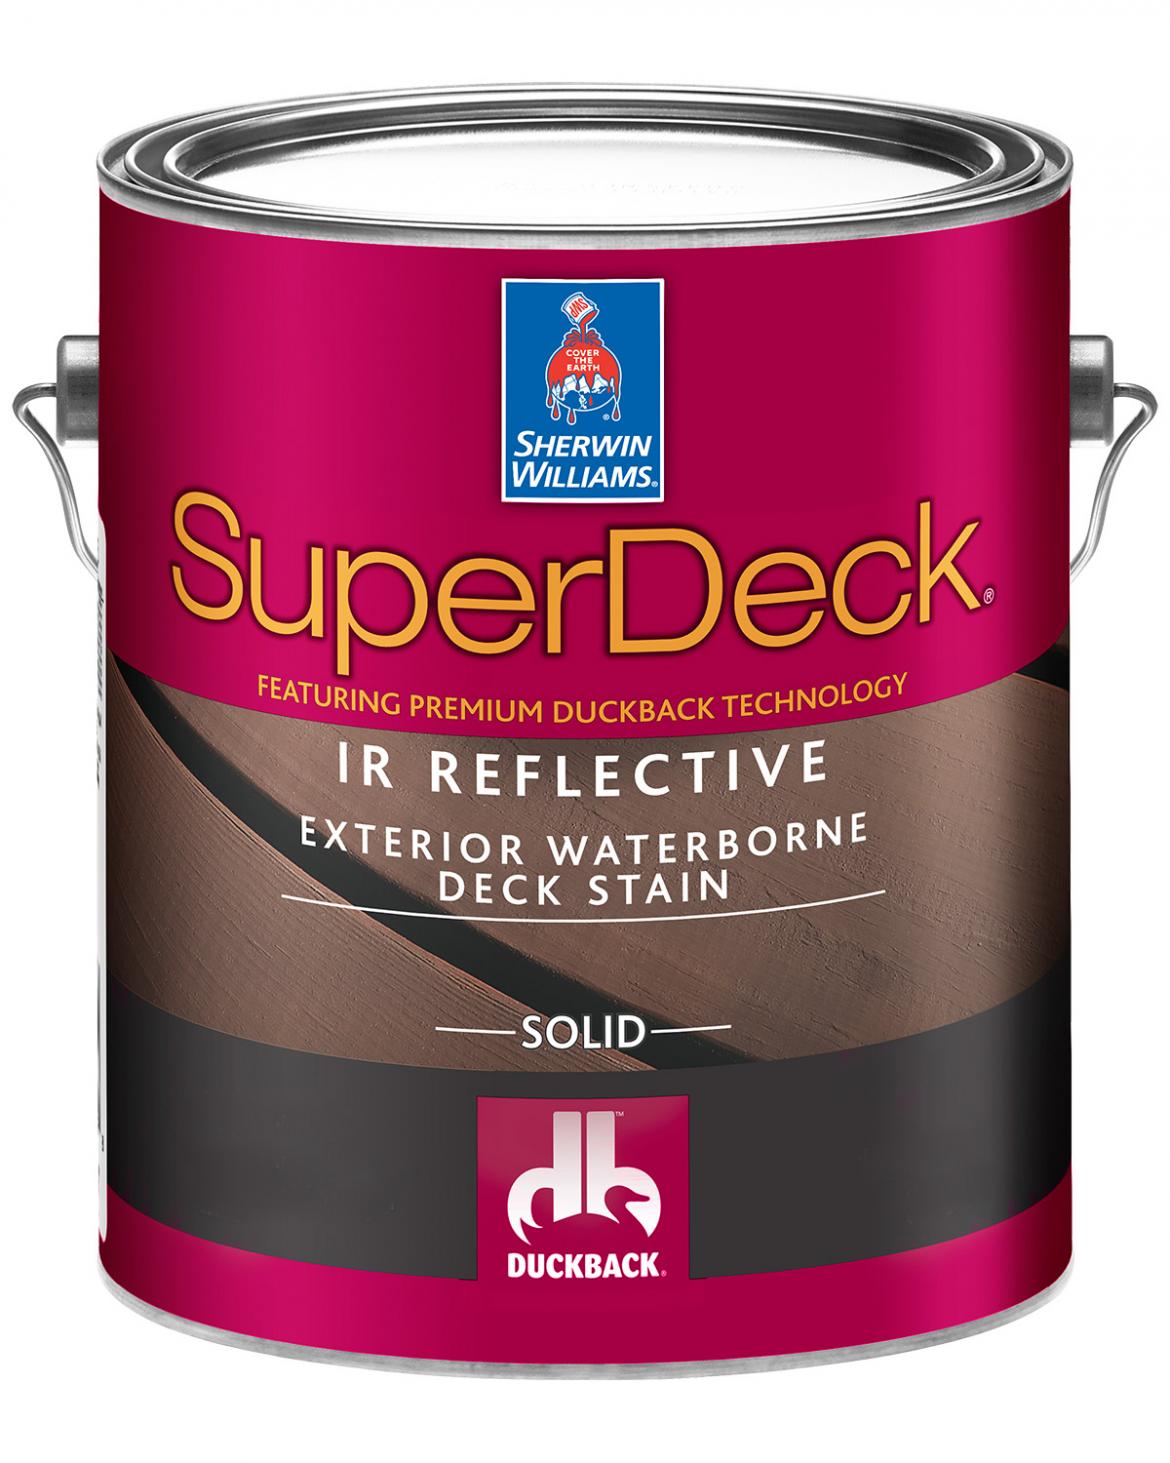 Sherwin Williams deck stain: SuperDeck Can